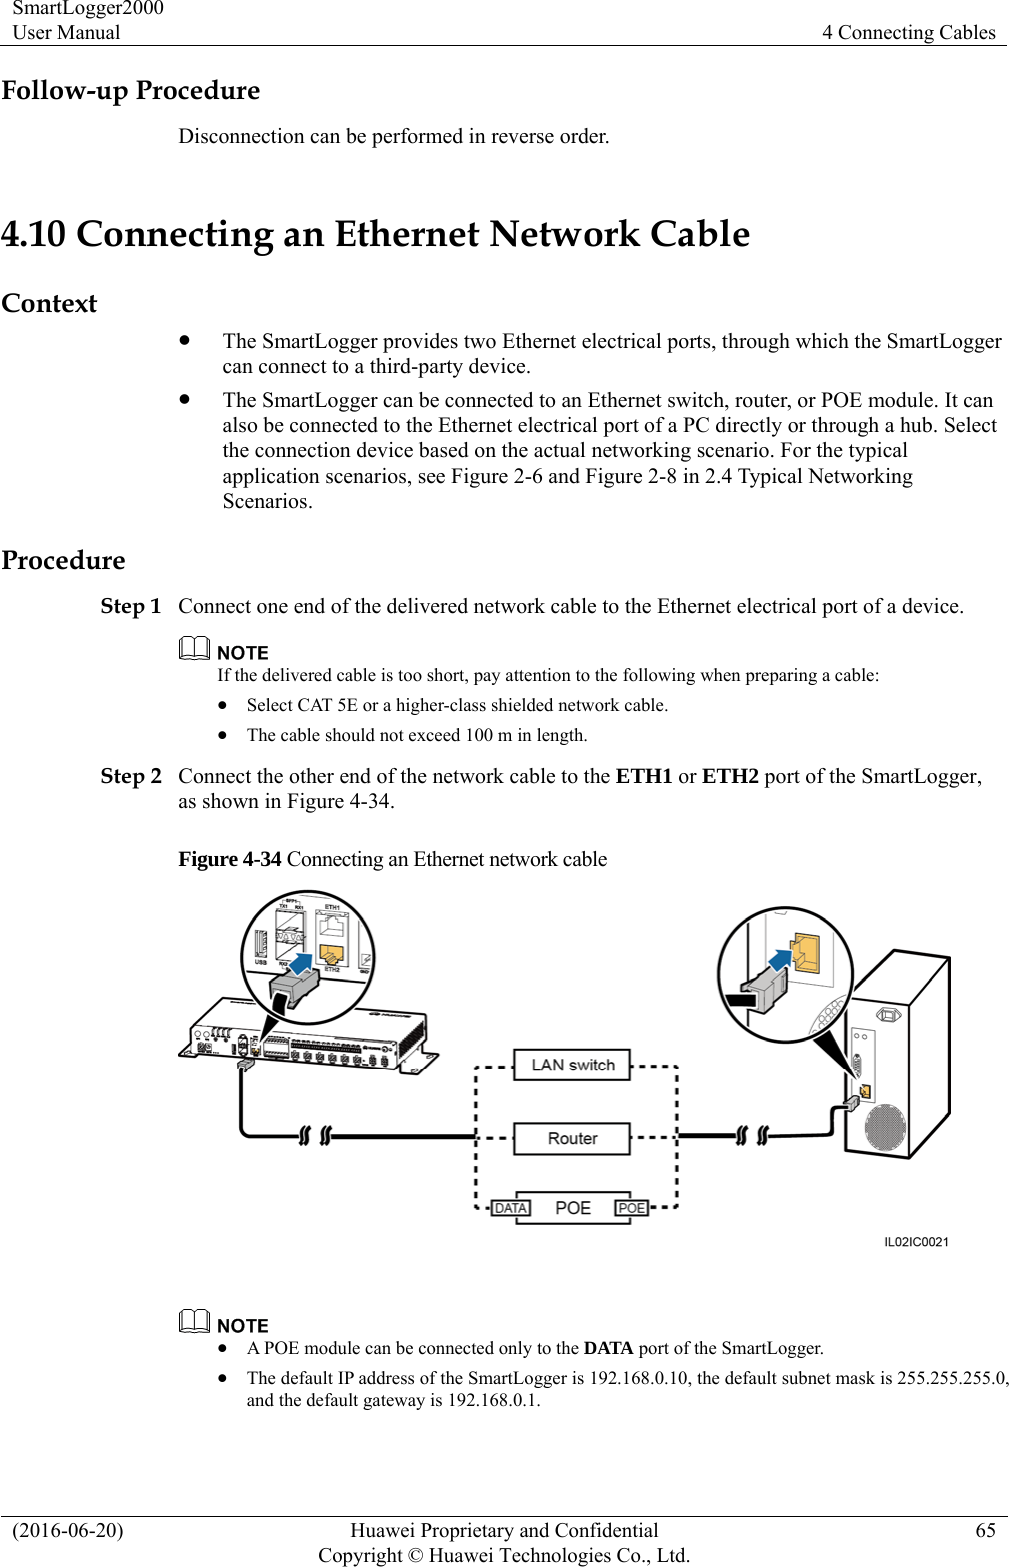 SmartLogger2000 User Manual  4 Connecting Cables (2016-06-20)  Huawei Proprietary and Confidential         Copyright © Huawei Technologies Co., Ltd.65 Follow-up Procedure Disconnection can be performed in reverse order. 4.10 Connecting an Ethernet Network Cable Context  The SmartLogger provides two Ethernet electrical ports, through which the SmartLogger can connect to a third-party device.  The SmartLogger can be connected to an Ethernet switch, router, or POE module. It can also be connected to the Ethernet electrical port of a PC directly or through a hub. Select the connection device based on the actual networking scenario. For the typical application scenarios, see Figure 2-6 and Figure 2-8 in 2.4 Typical Networking Scenarios.  Procedure Step 1 Connect one end of the delivered network cable to the Ethernet electrical port of a device.    If the delivered cable is too short, pay attention to the following when preparing a cable:    Select CAT 5E or a higher-class shielded network cable.    The cable should not exceed 100 m in length.   Step 2 Connect the other end of the network cable to the ETH1 or ETH2 port of the SmartLogger, as shown in Figure 4-34.   Figure 4-34 Connecting an Ethernet network cable     A POE module can be connected only to the DATA port of the SmartLogger.    The default IP address of the SmartLogger is 192.168.0.10, the default subnet mask is 255.255.255.0, and the default gateway is 192.168.0.1. 